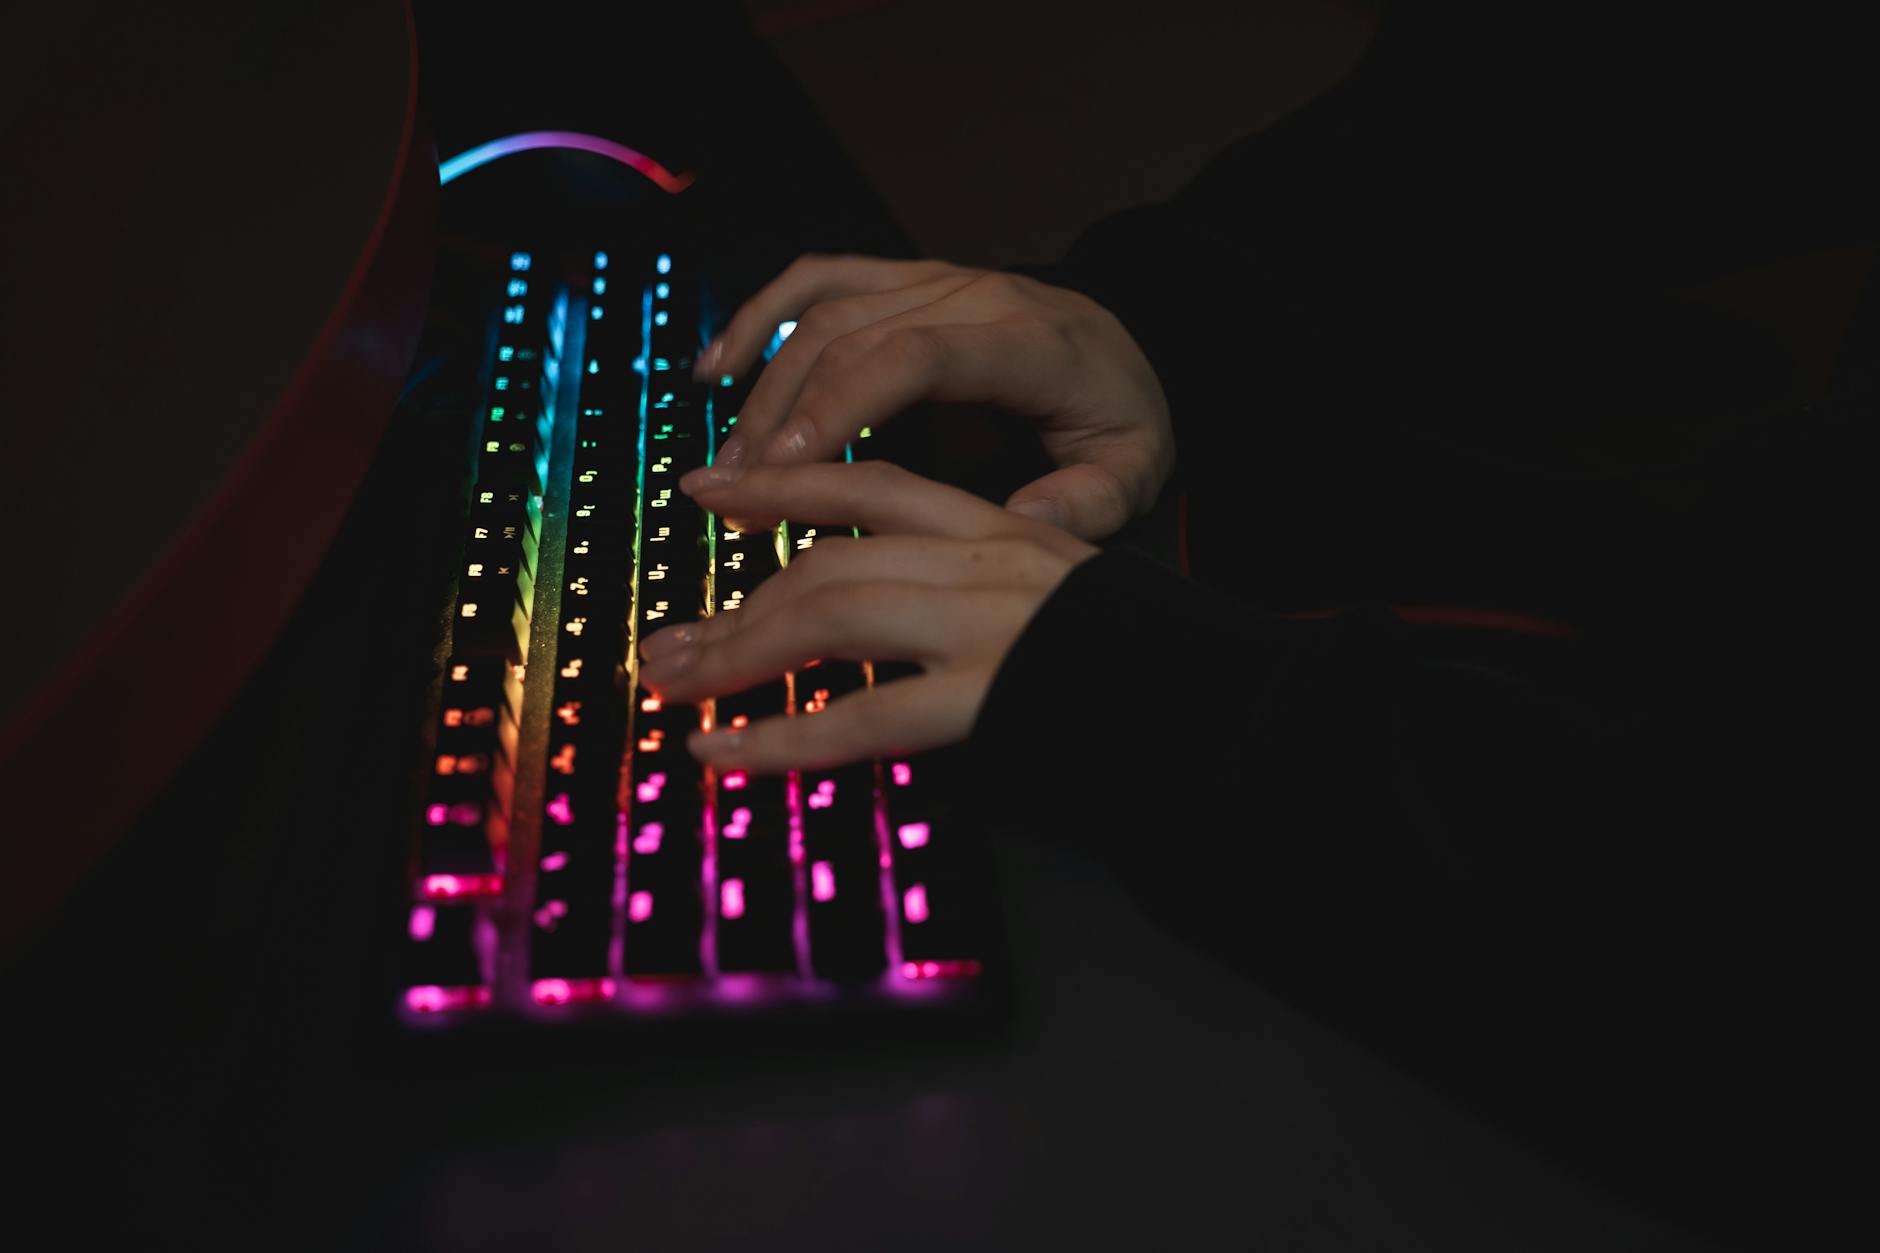 An image of a gaming keyboard with RGB lights.